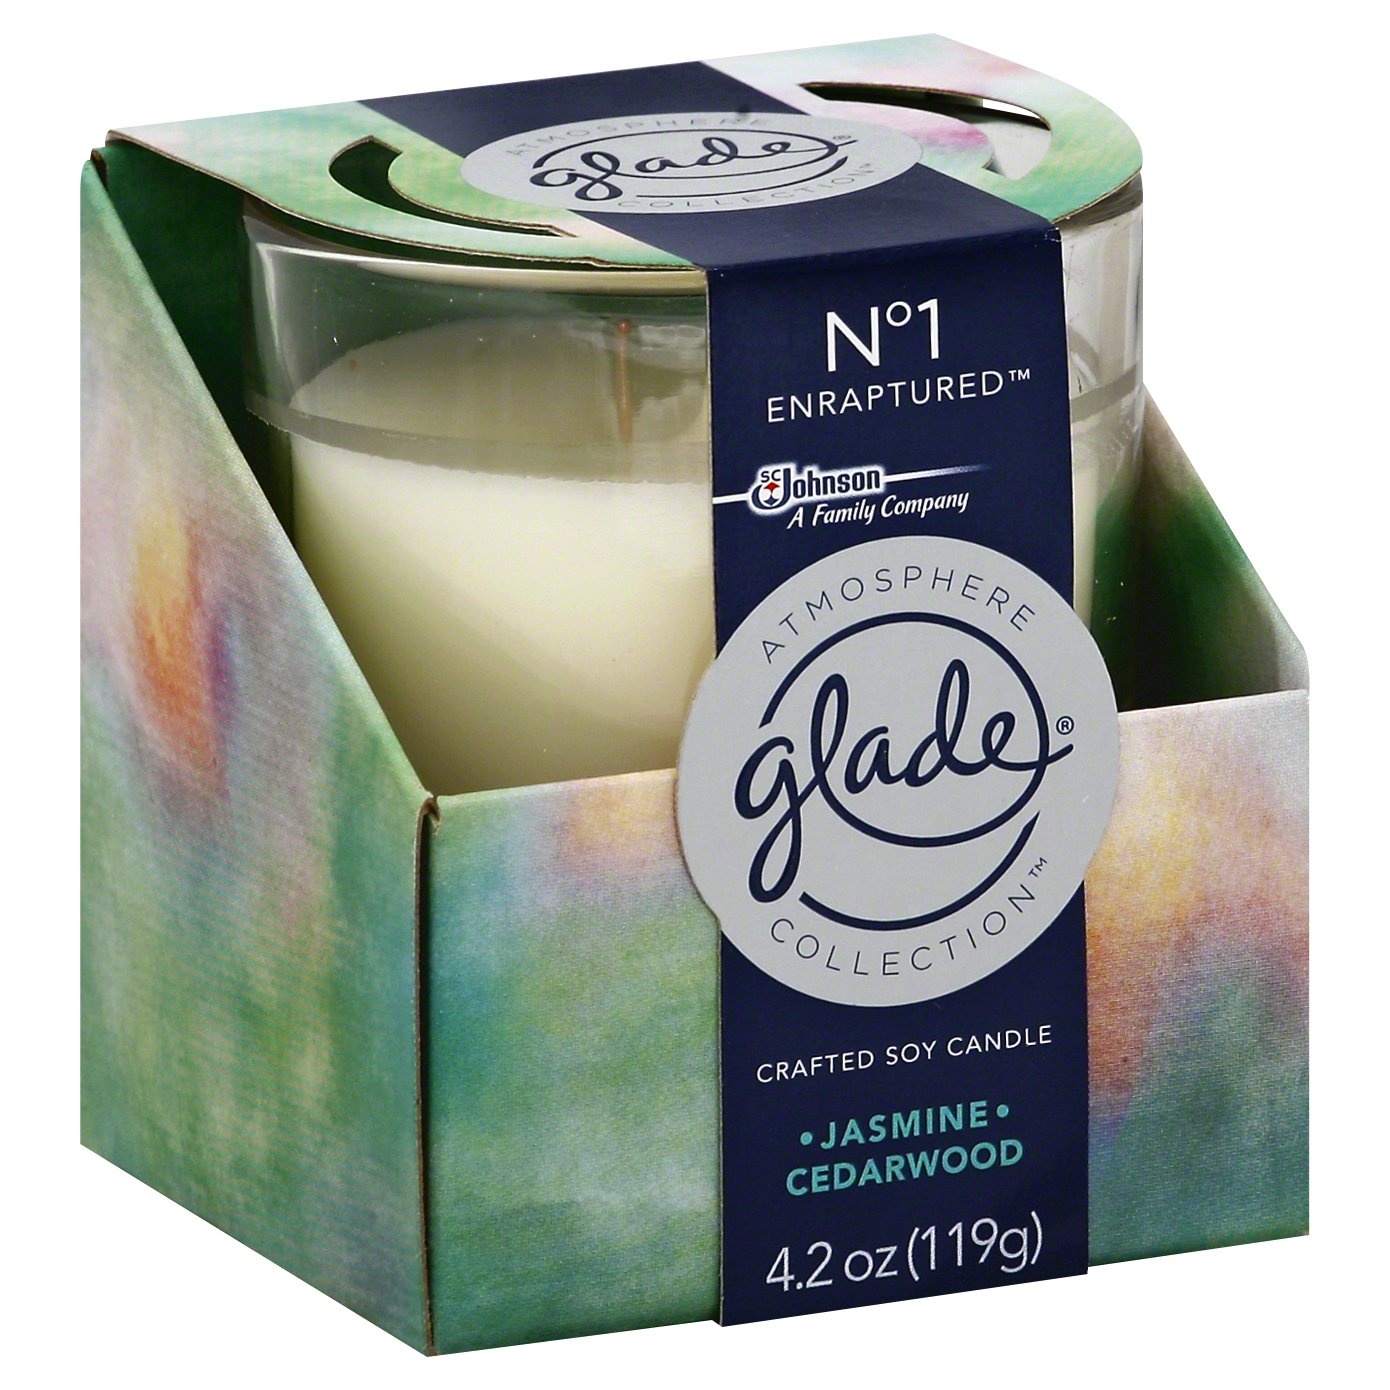 slide 1 of 1, Glade Atmosphere Collection Crafted Soy Candle Jasmine Cedarwood, 4.2 oz